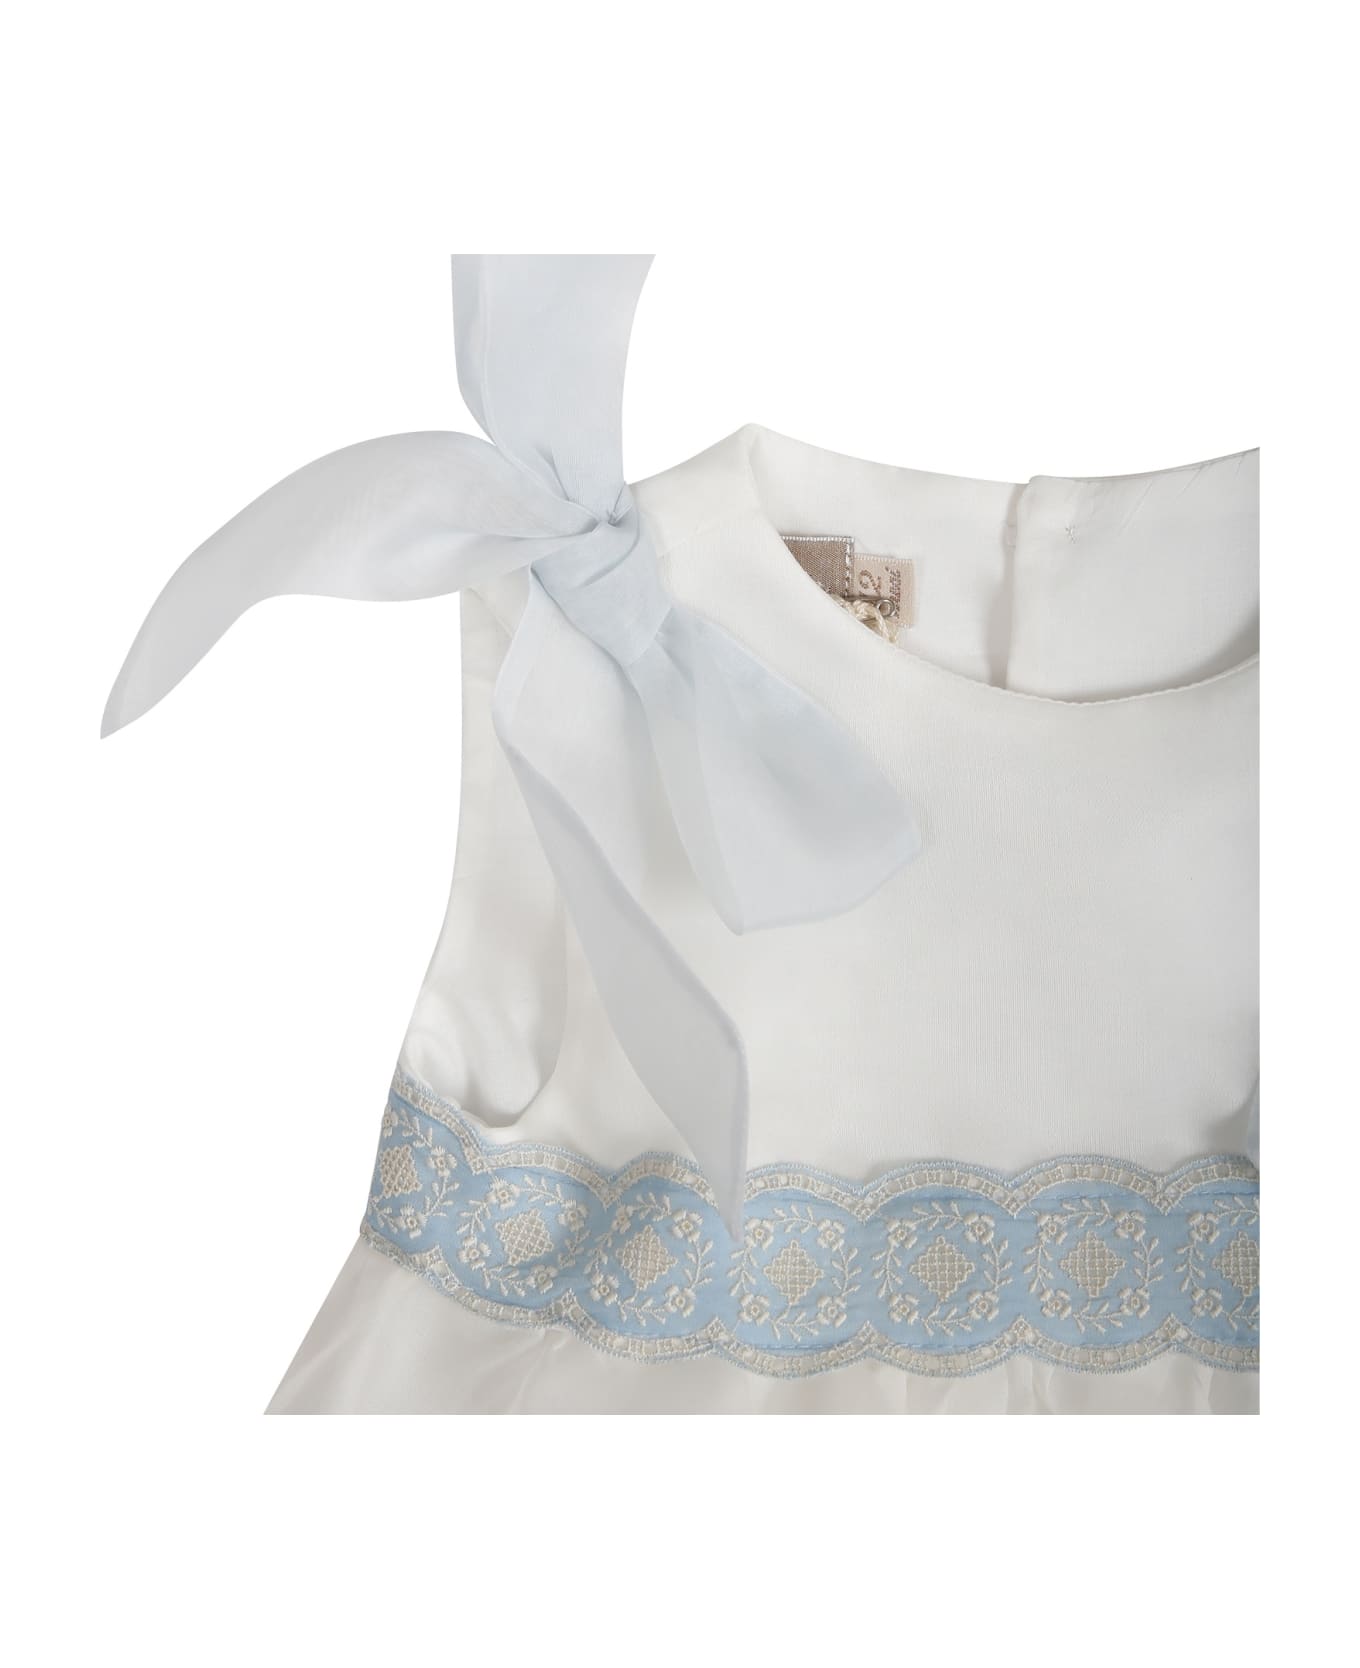 La stupenderia White Dress For Baby Girl With Light Blue Embroidery - White